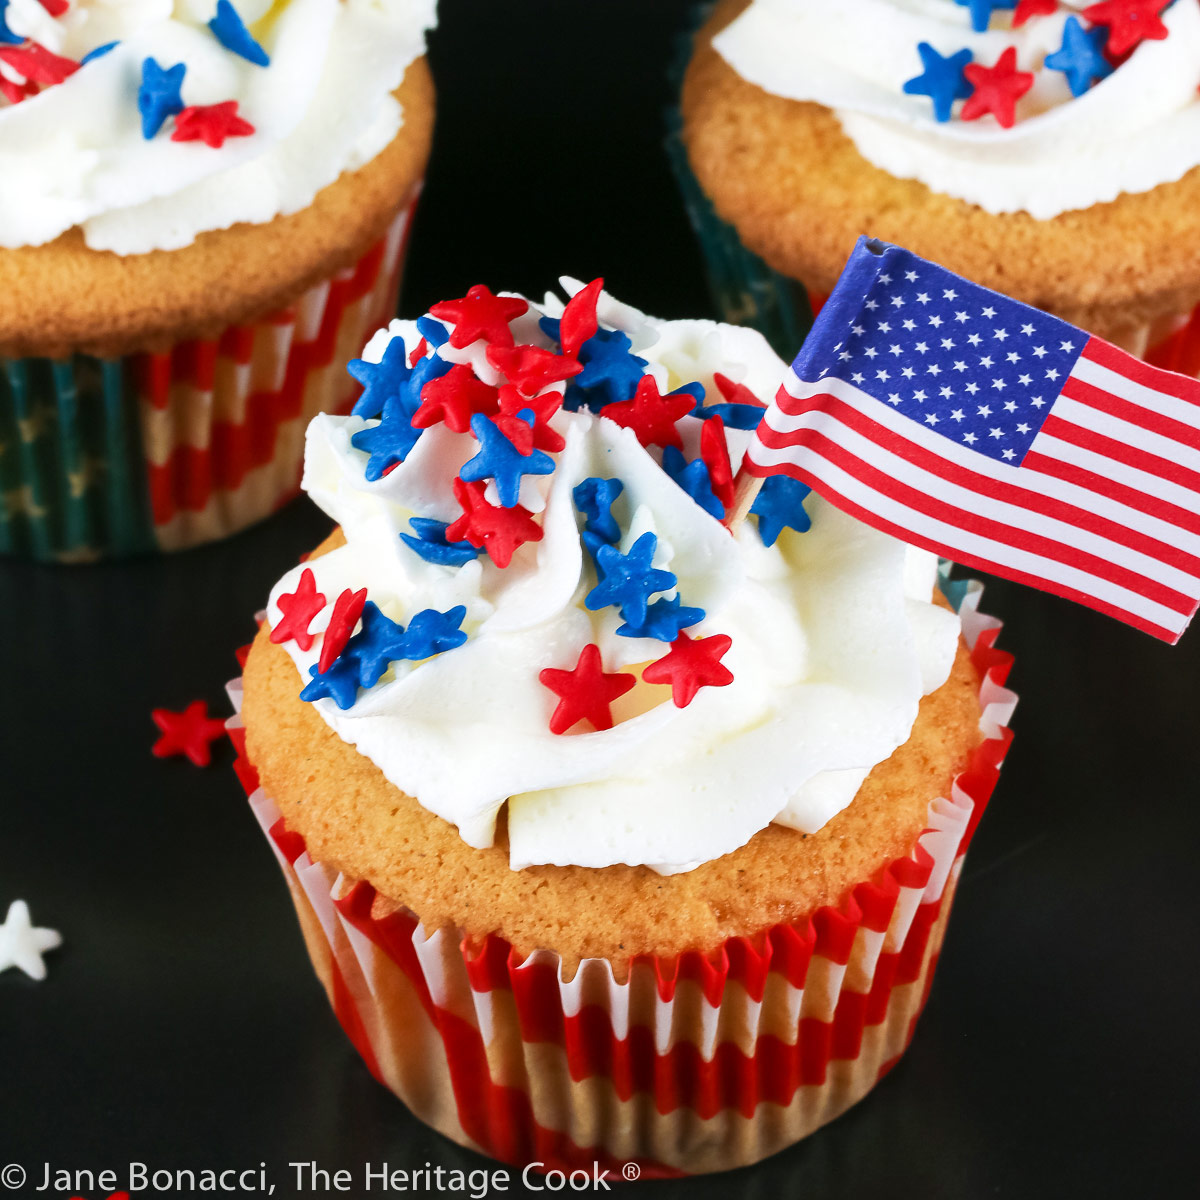 Macadamia Nut White Chocolate Cupcakes for the 4th of July Celebrations © 2022 Jane Bonacci, The Heritage Cook